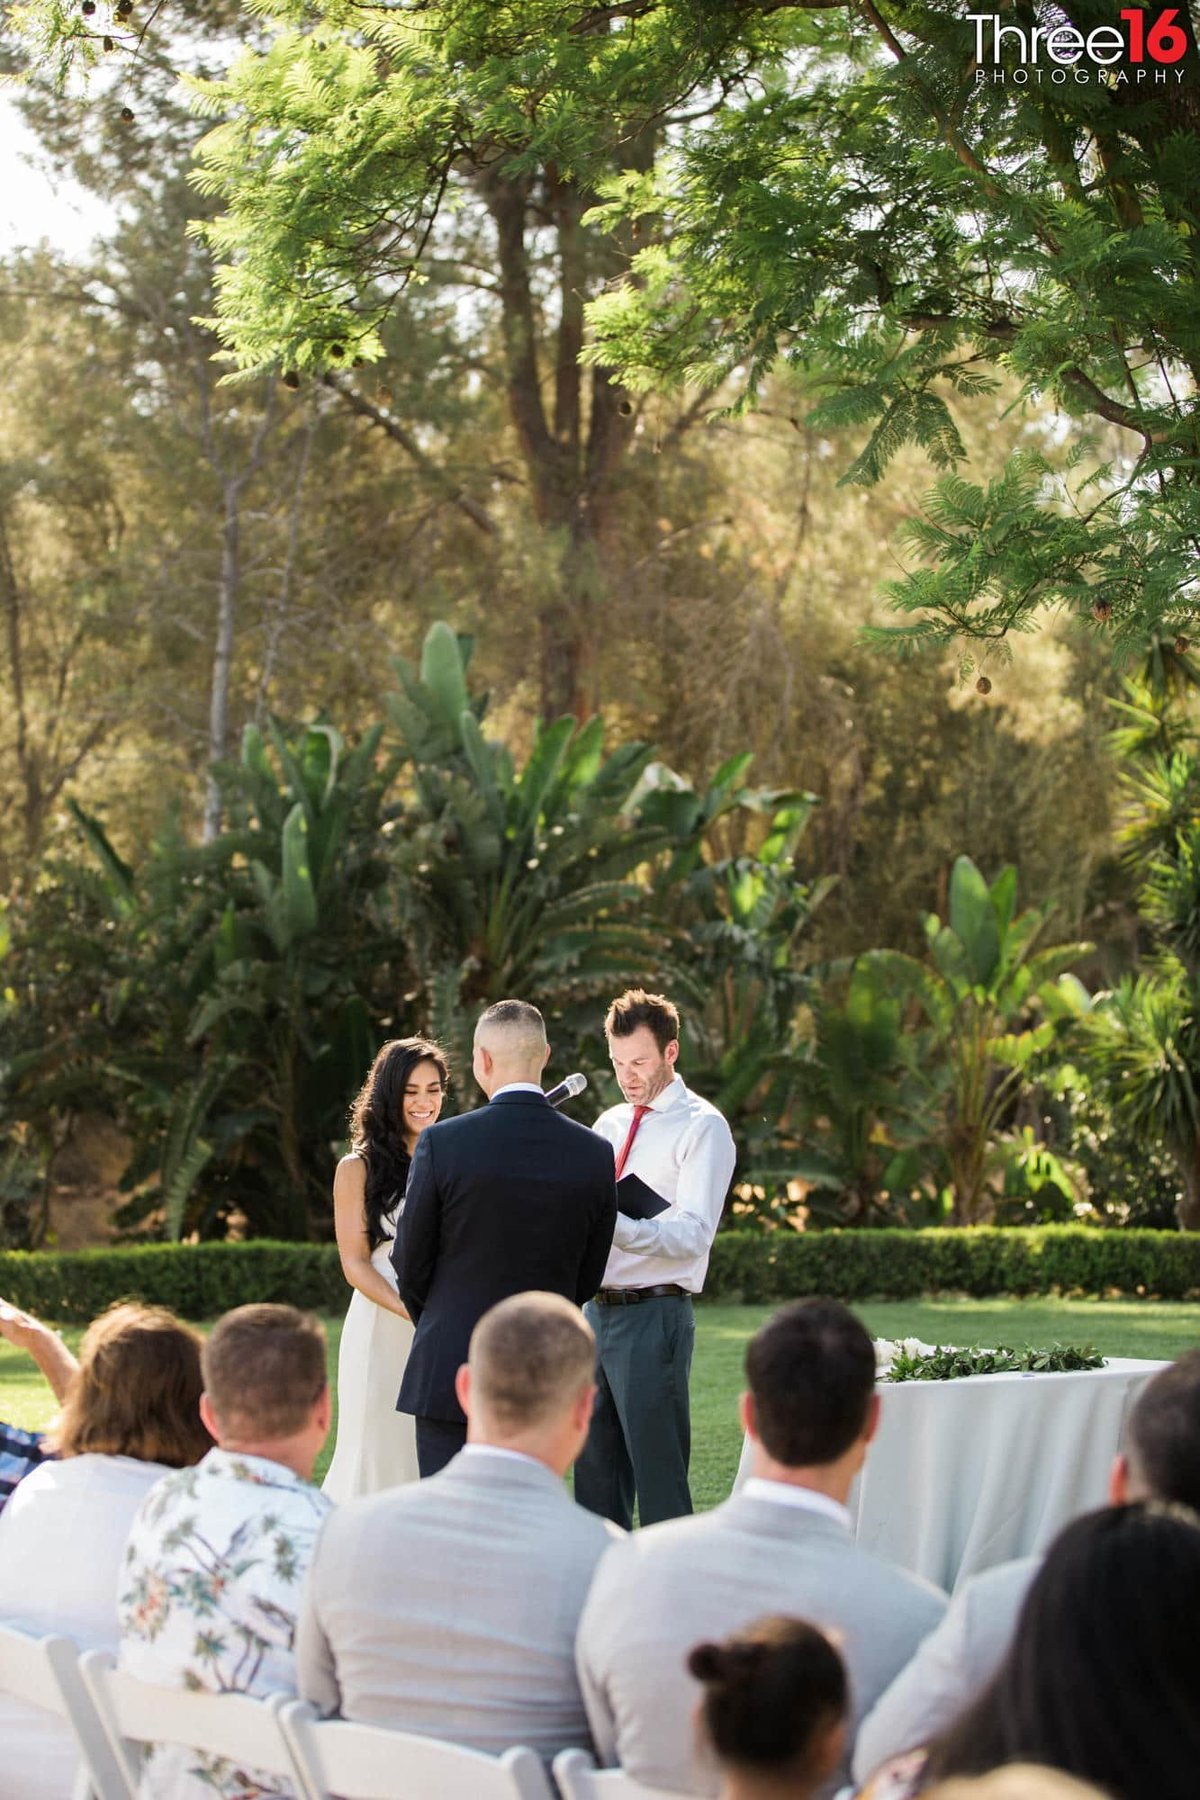 Wedding ceremony at Newhall Mansion